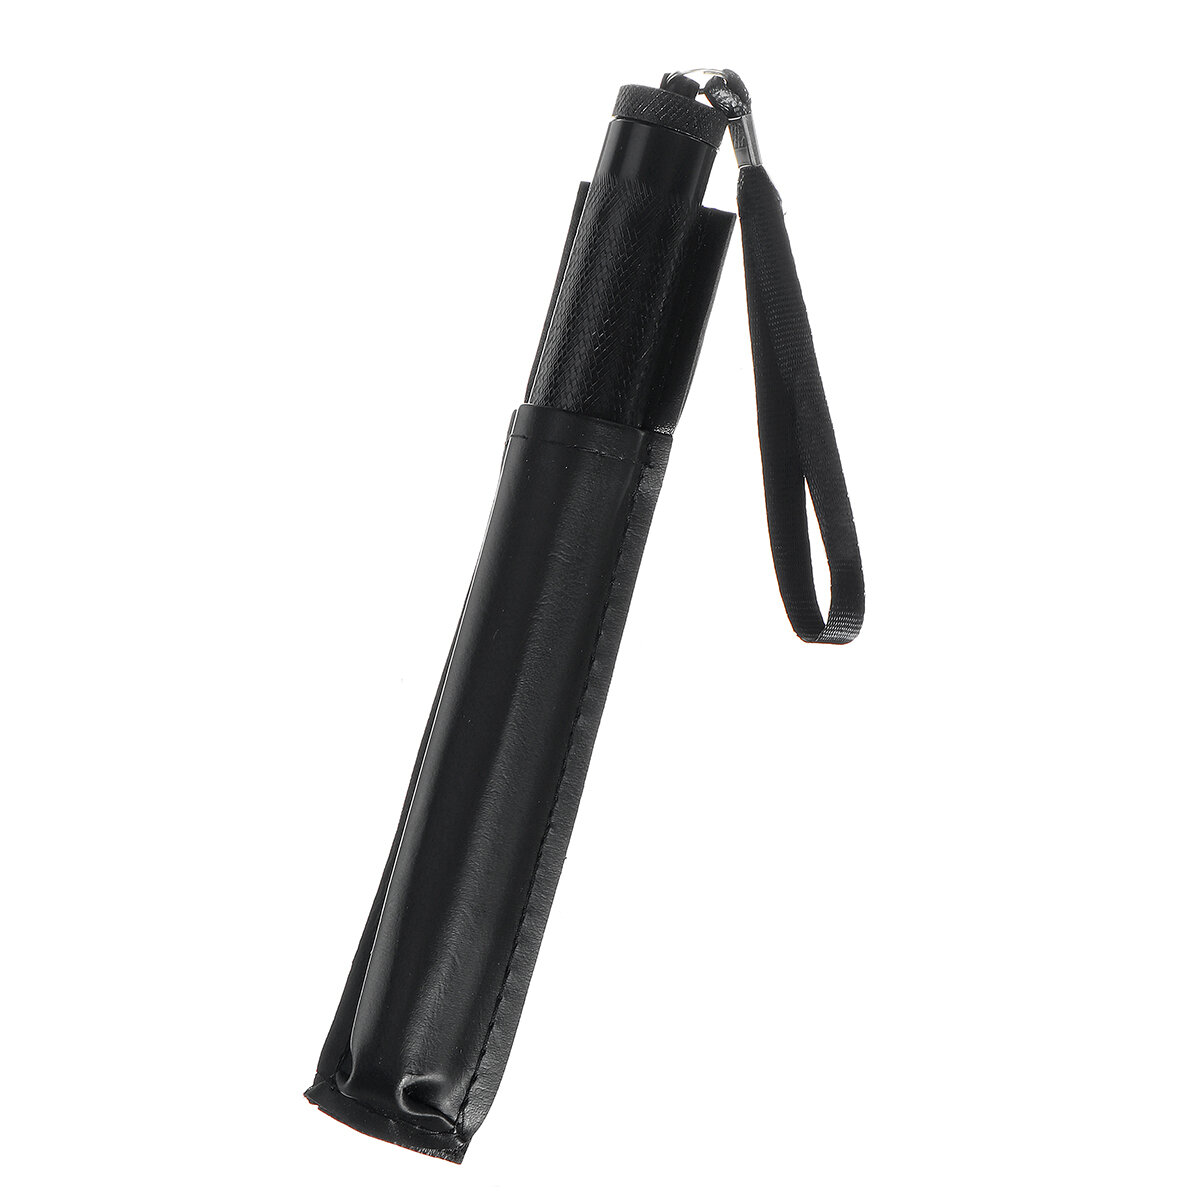 Telescopic Steel Stick Rod Safe Walking Security Emergency Portable 3 Sections